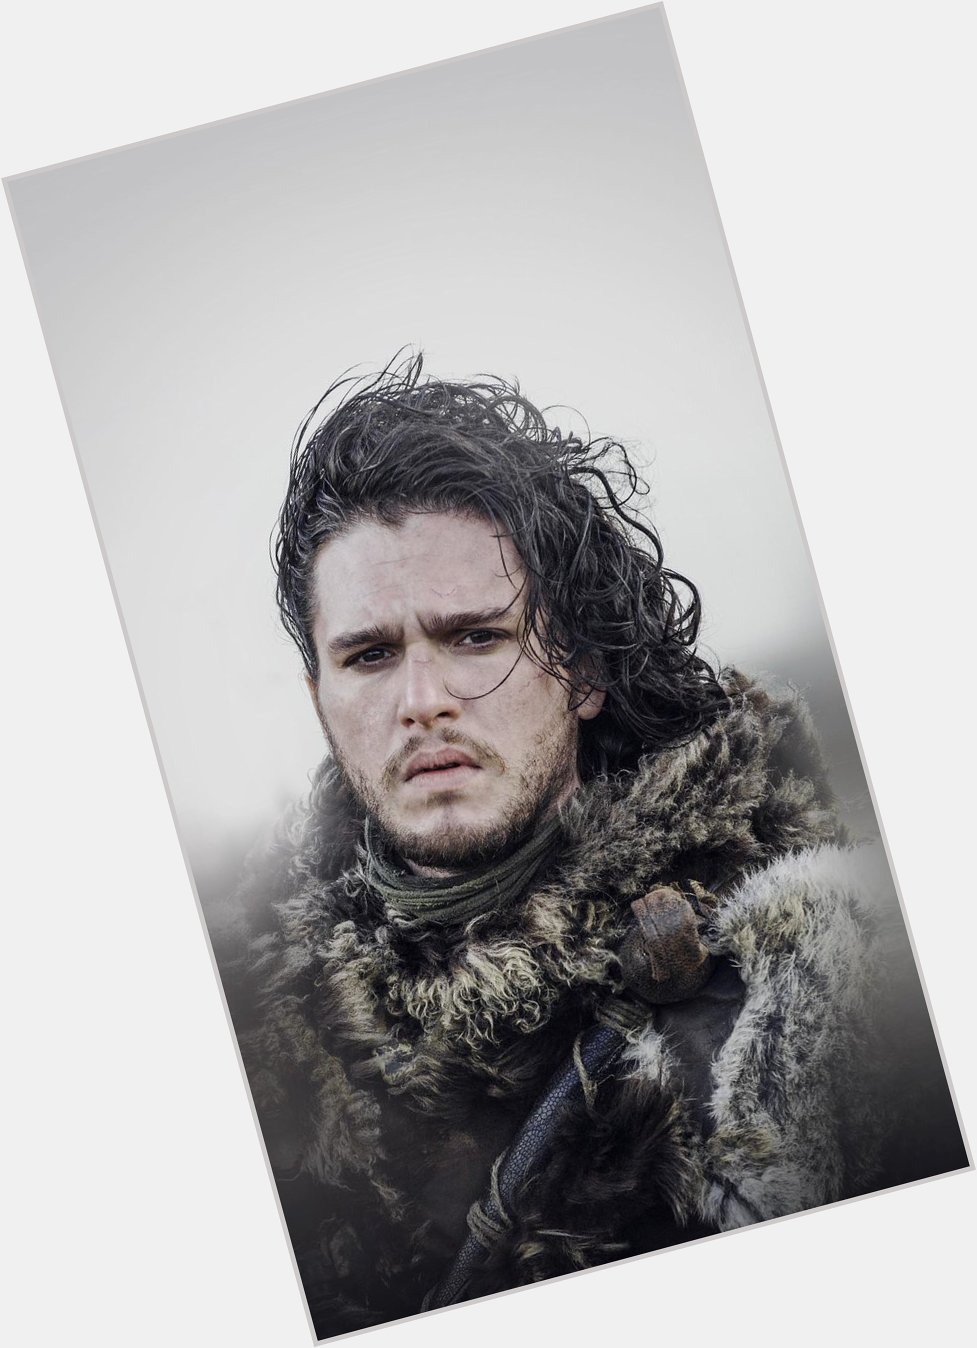 Happy 35th Birthday to our King in the North, Kit Harington  